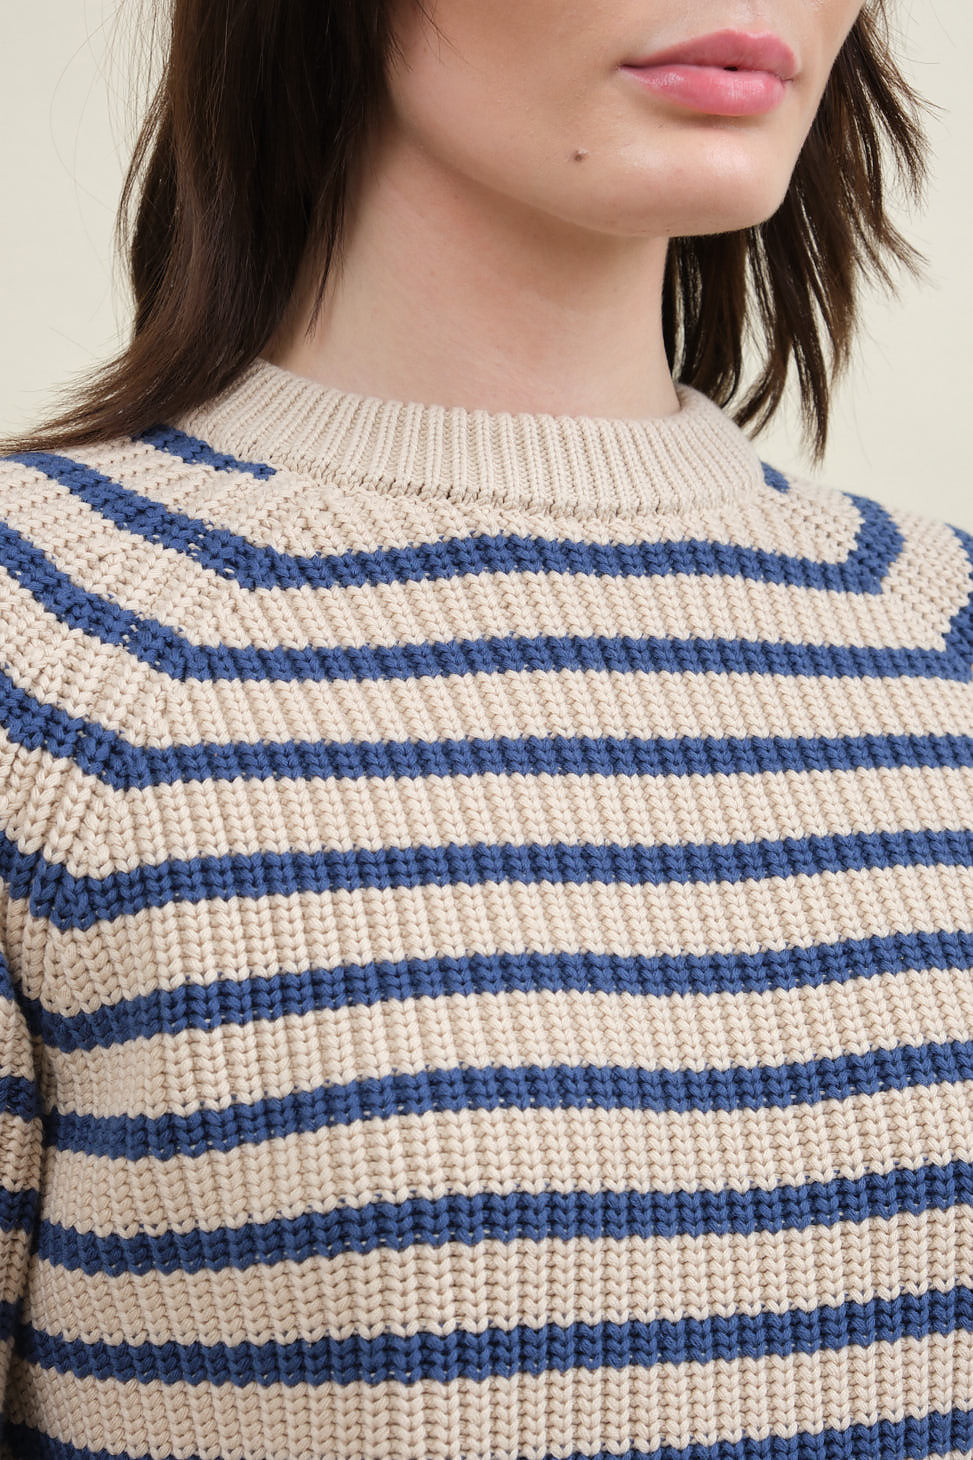 Collar and detailing on Phoebe Stripe Sweater in Natural/Denim Blue